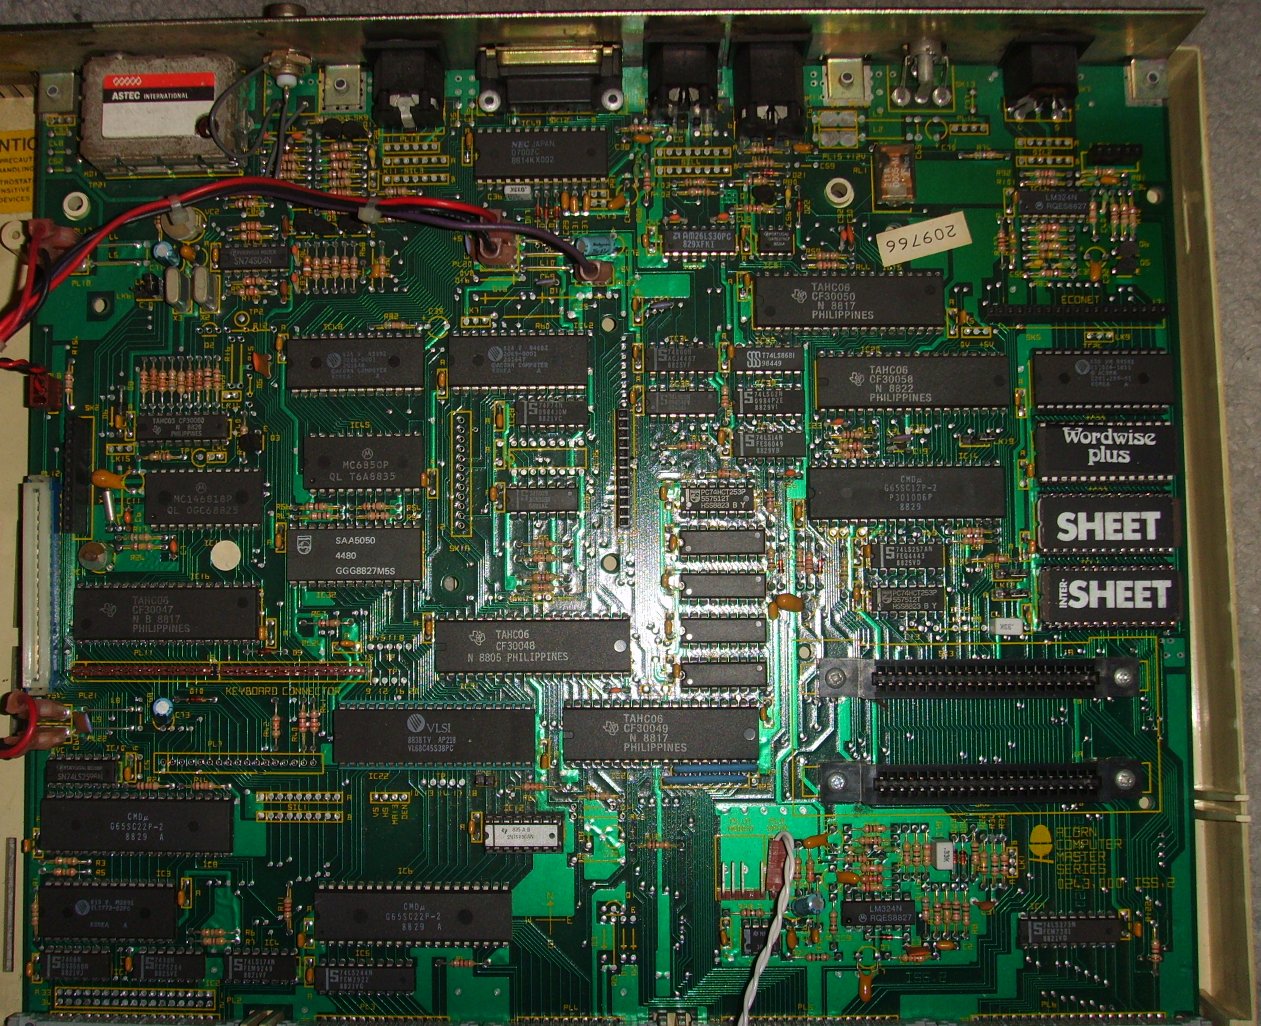 BBC Master Microcomputer - Issue 2 Motherboard